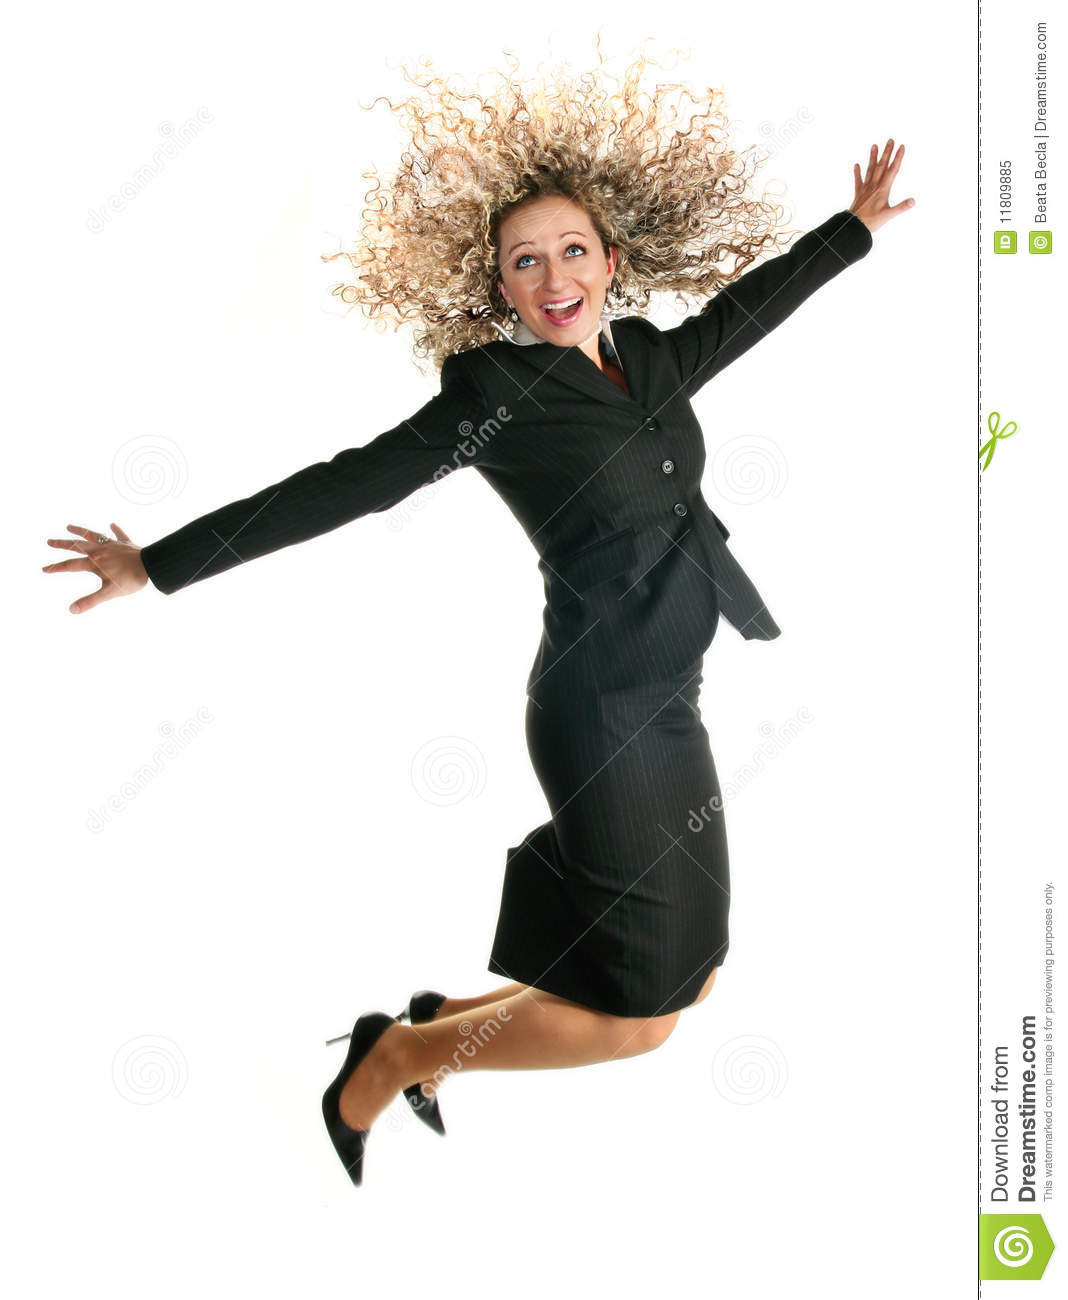 Excited Jumping Business Woman Royalty Free Stock Photo   Image